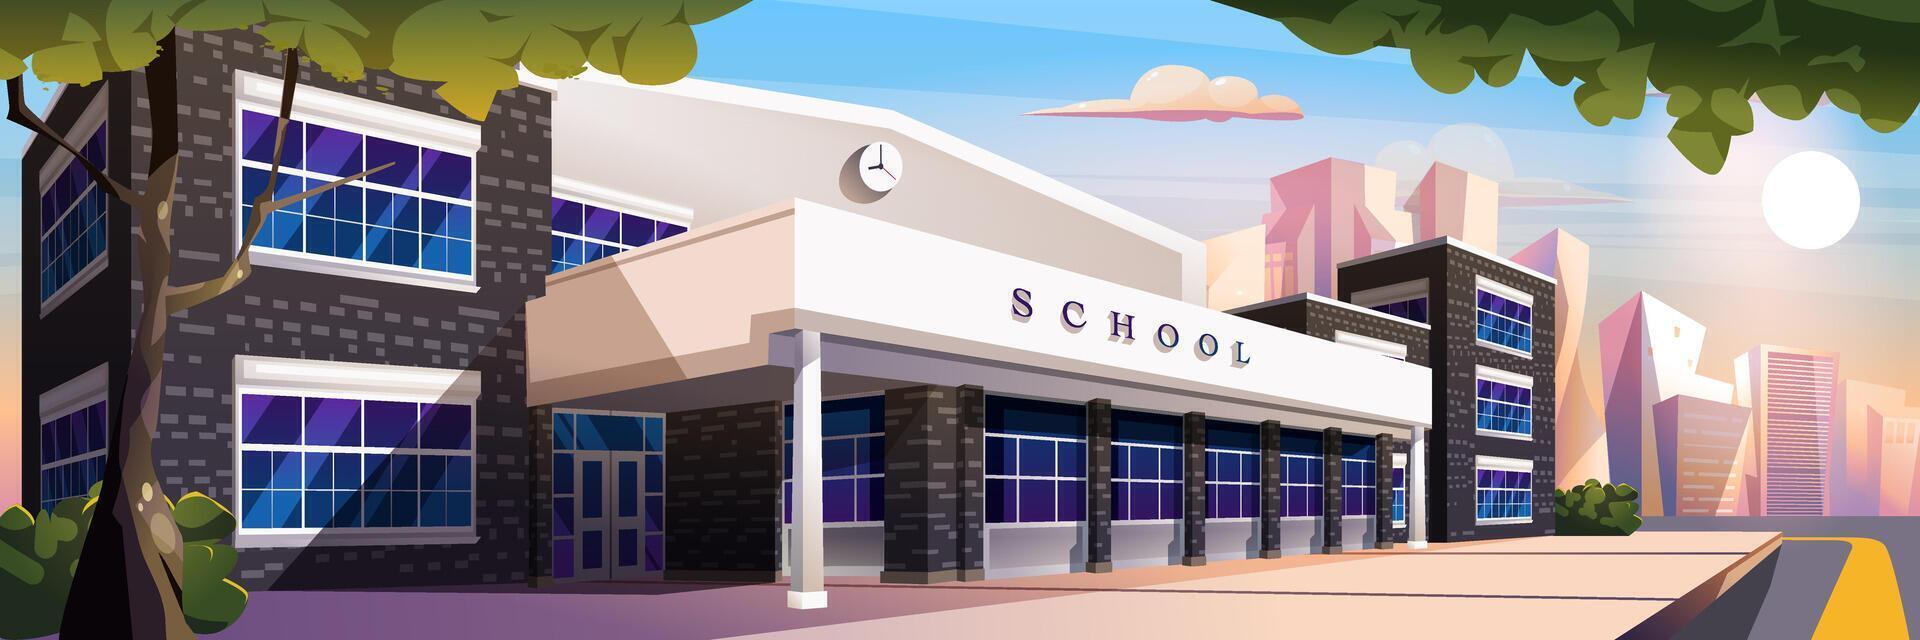 School facade background banner in flat cartoon design. College, academy or university exterior poster in modern architecture. Building with entrance and windows by city road. Vector illustration